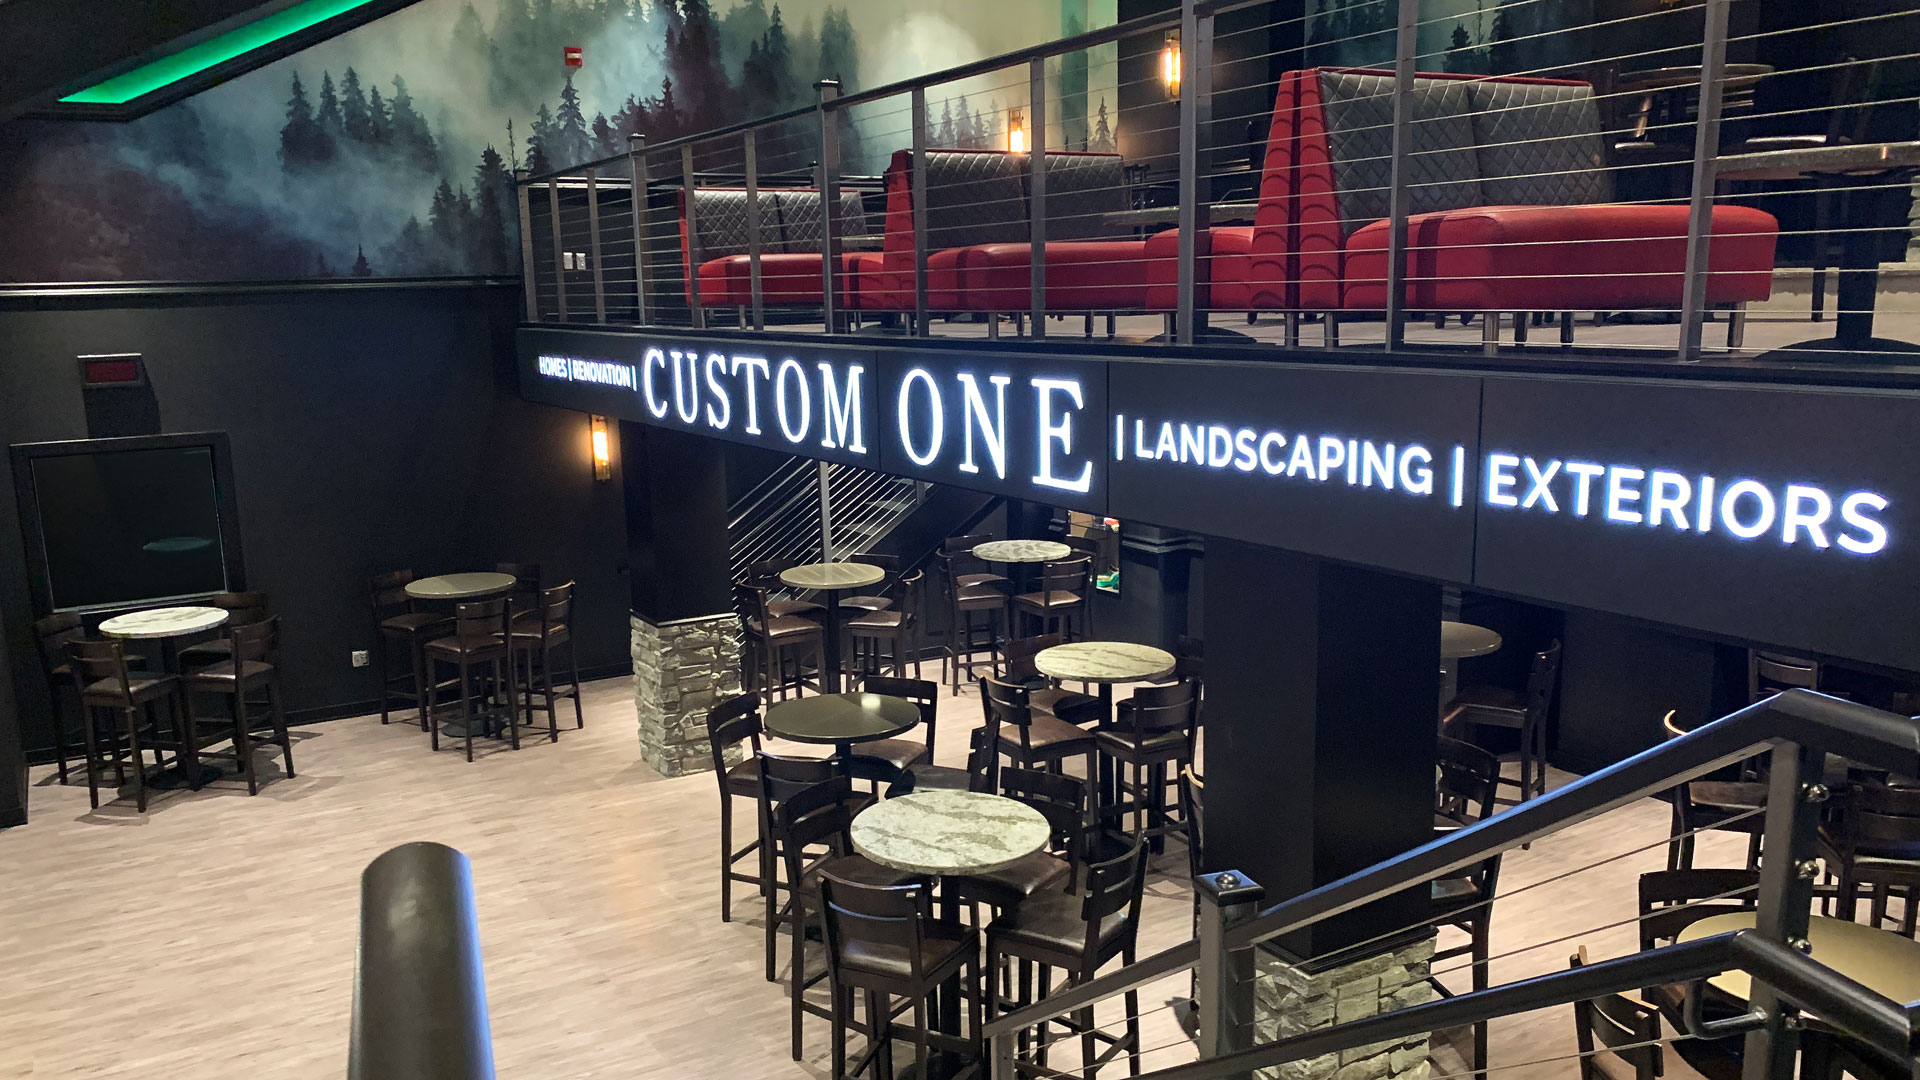 The On the Glass Club, with forest wall graphics, red booths and Custom One illuminated on a marquee.